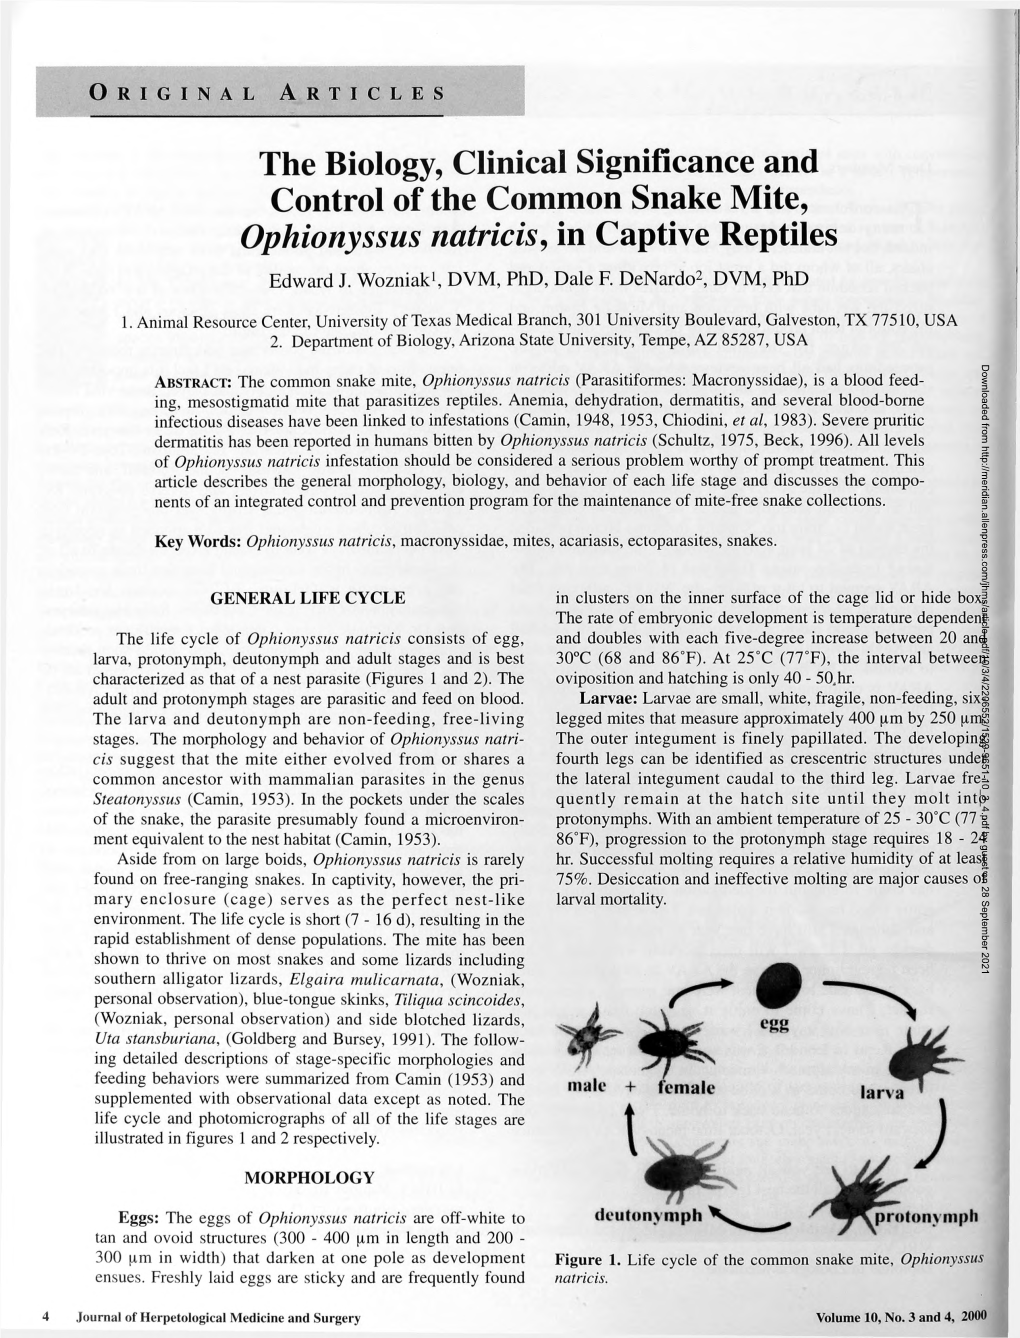 The Biology, Clinical Significance and Control of the Common Snake Mite, Ophionyssus Natricis, in Captive Reptiles Edward J